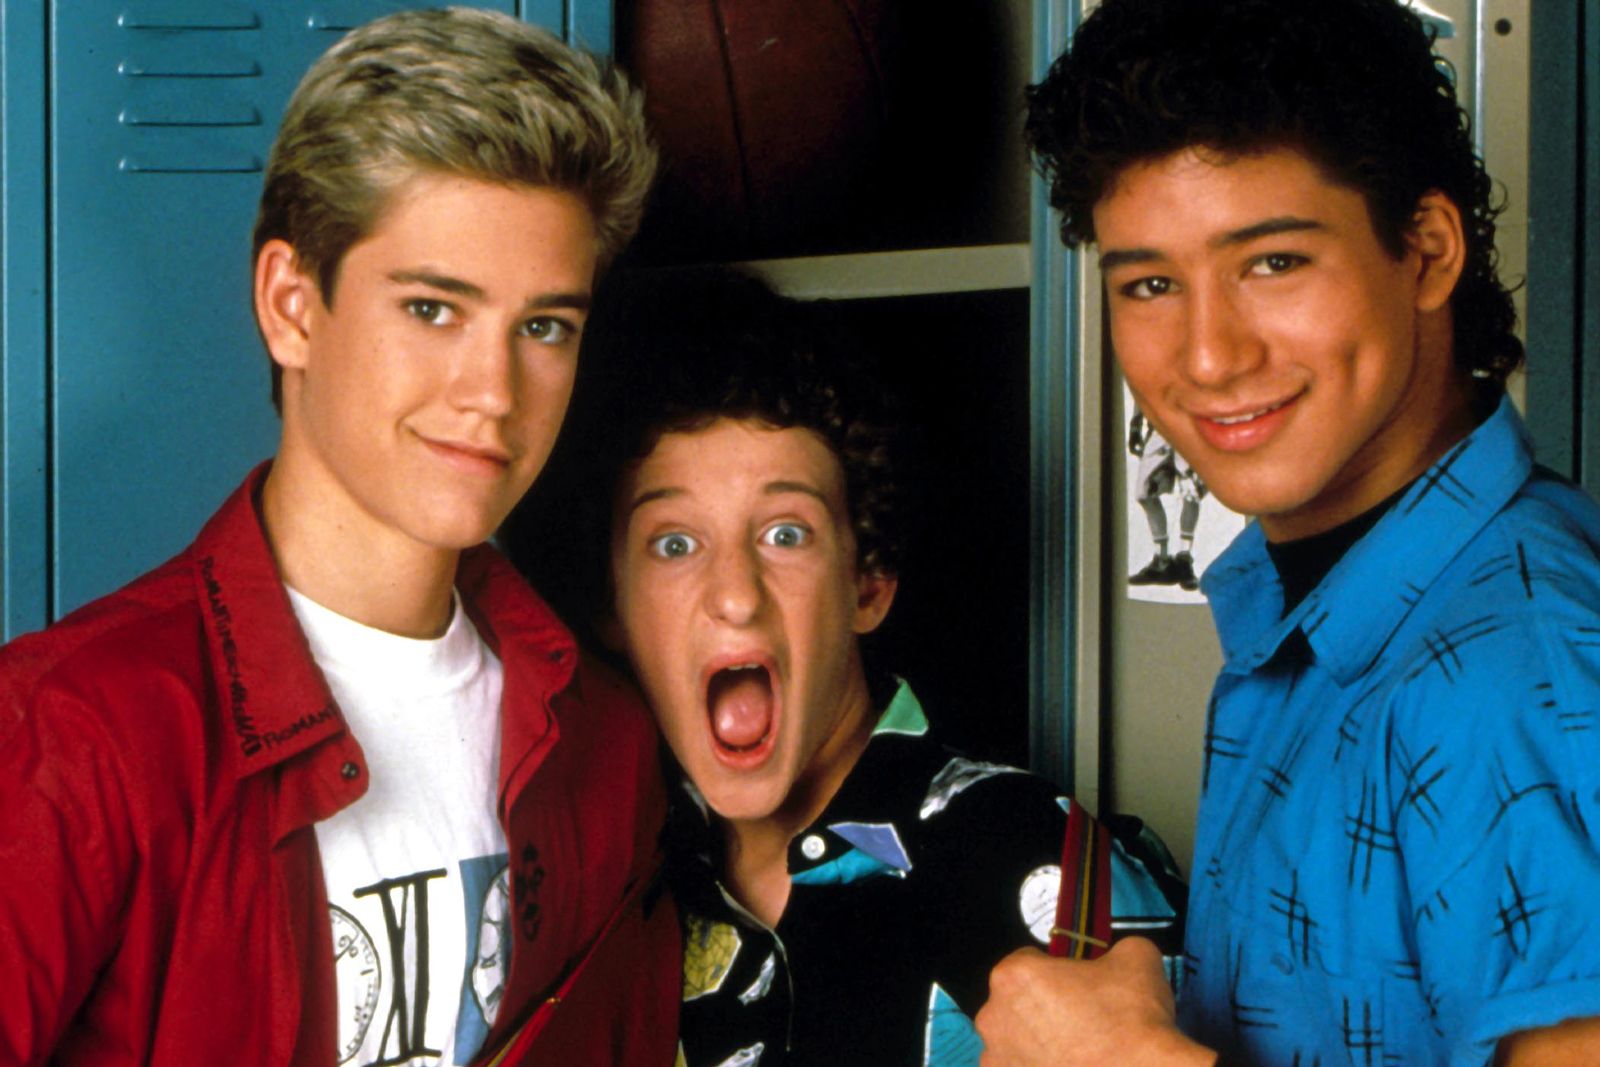 Saved by The Bell - Screech - 90s tv show 